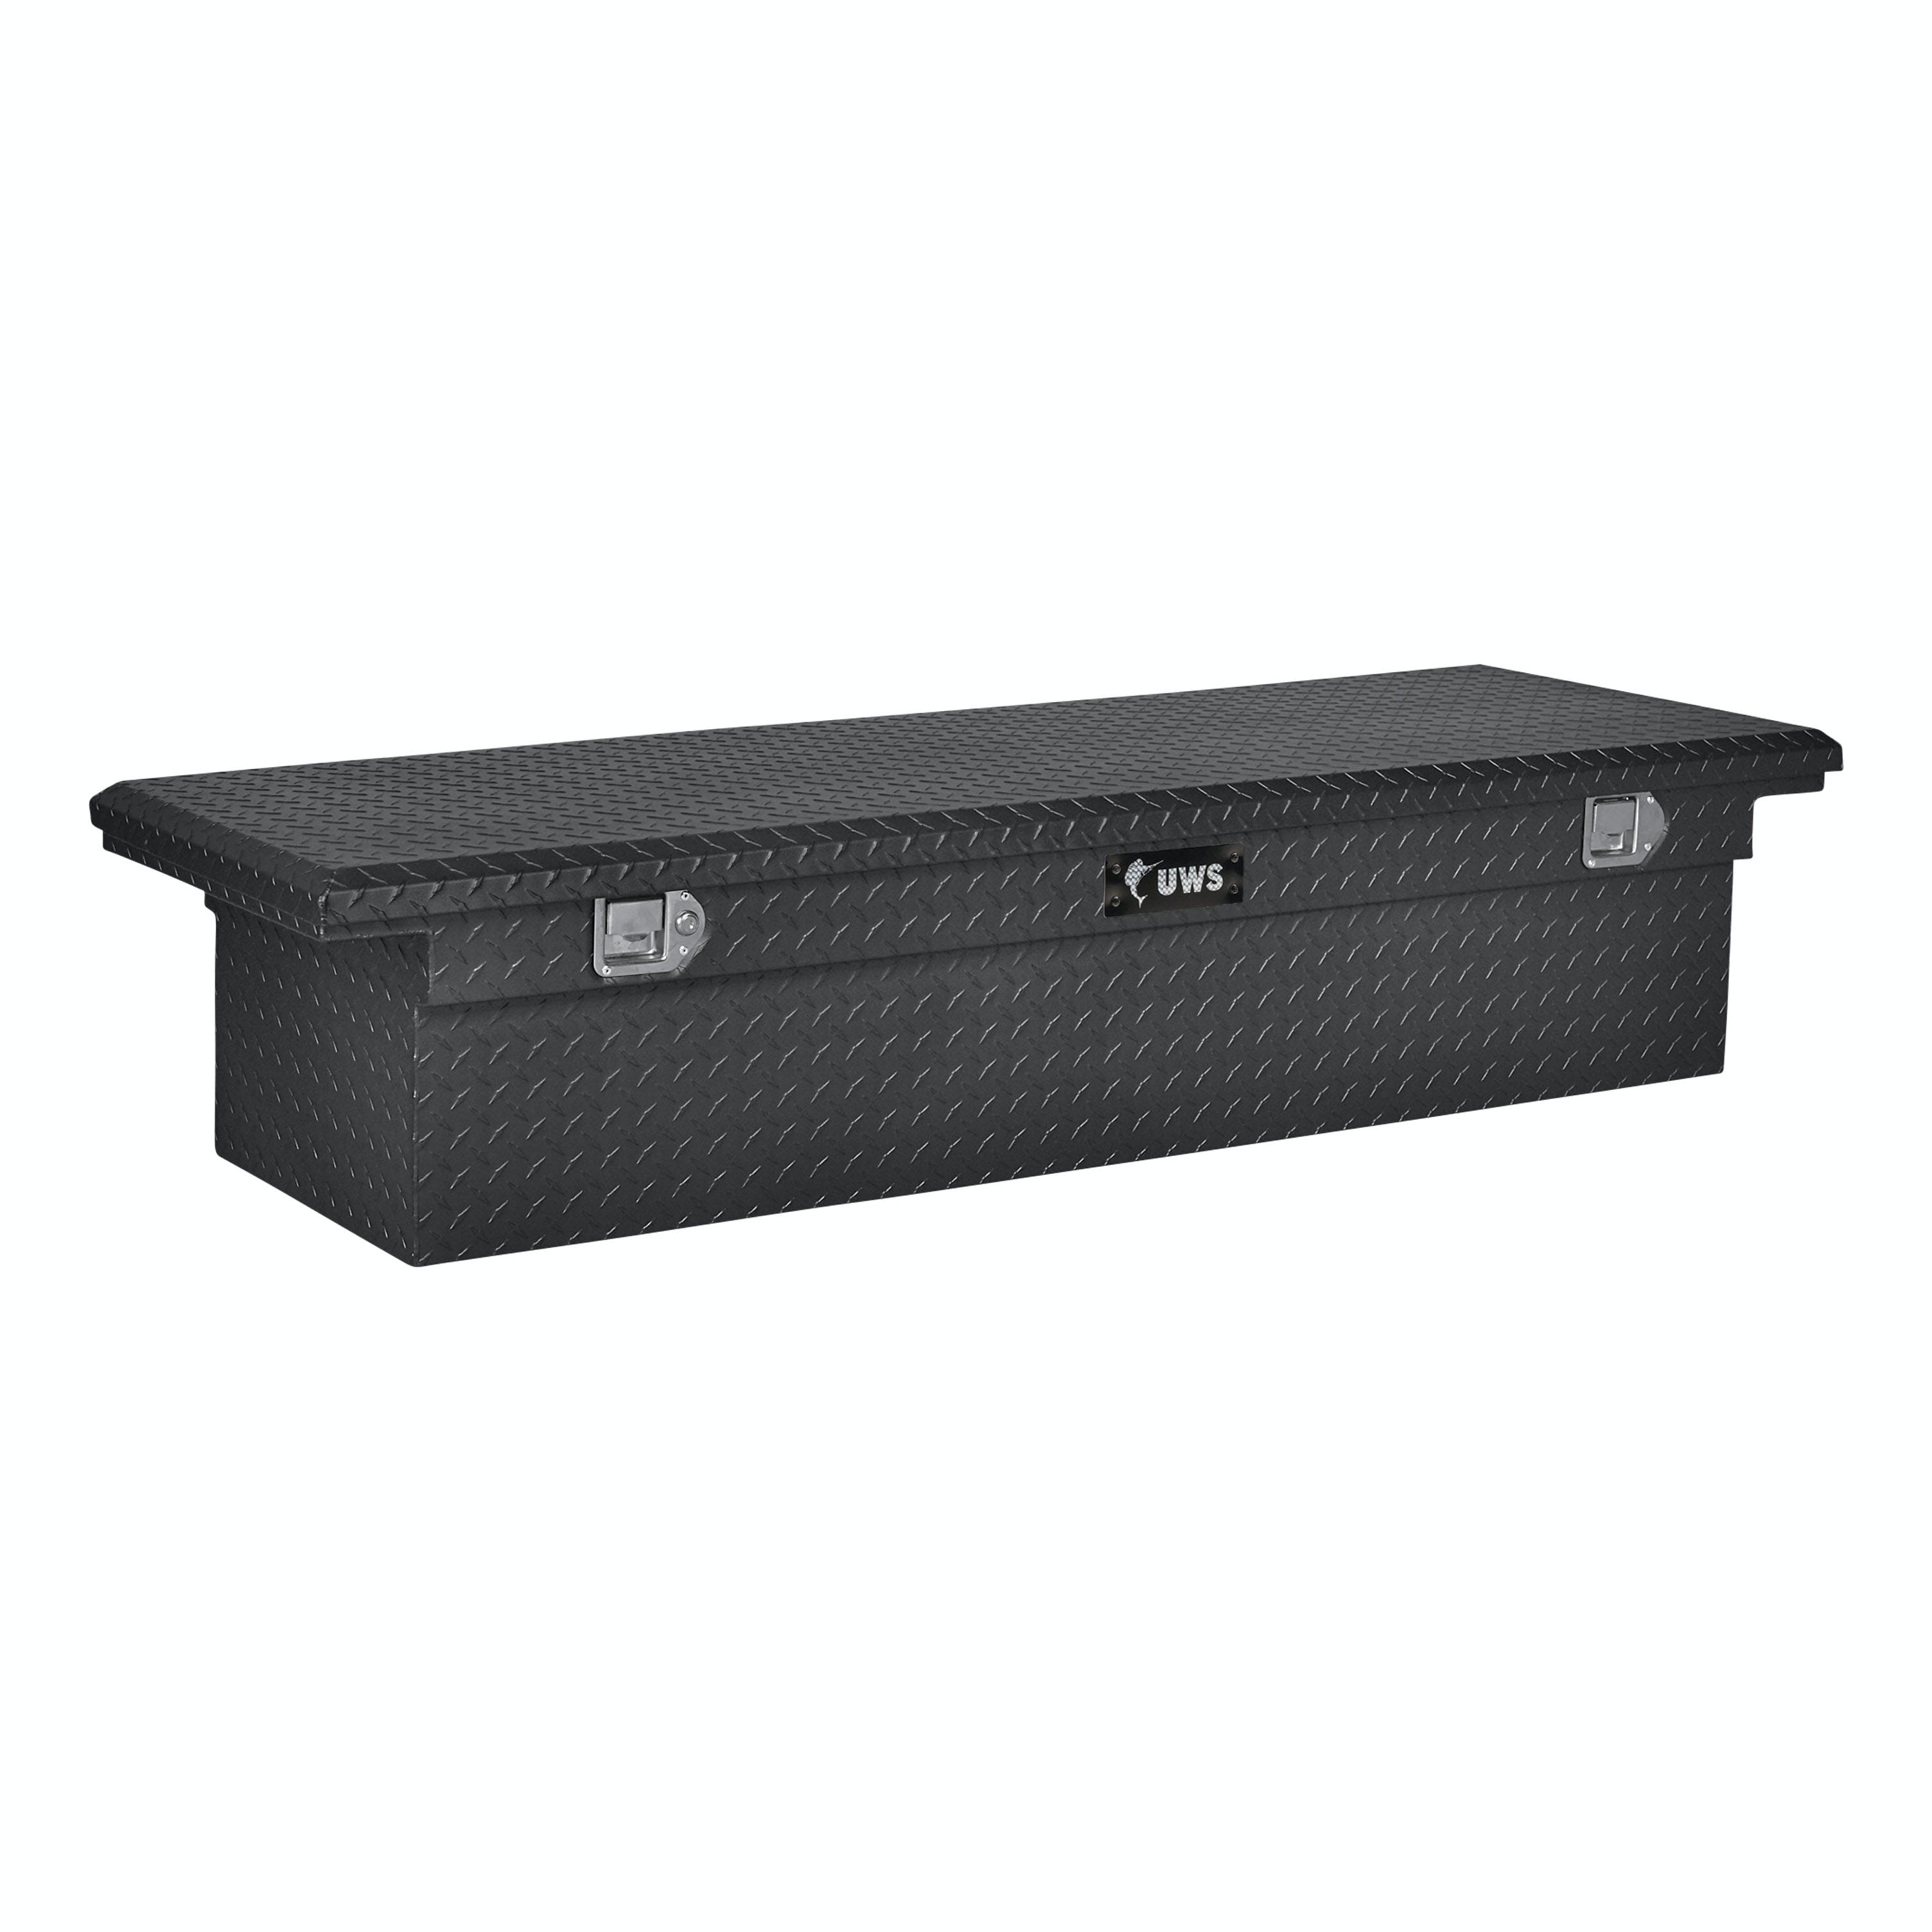 UWS TBS-72-LP-MB 72 inch Aluminum Single Lid Crossover Toolbox Low Profile Matte Black